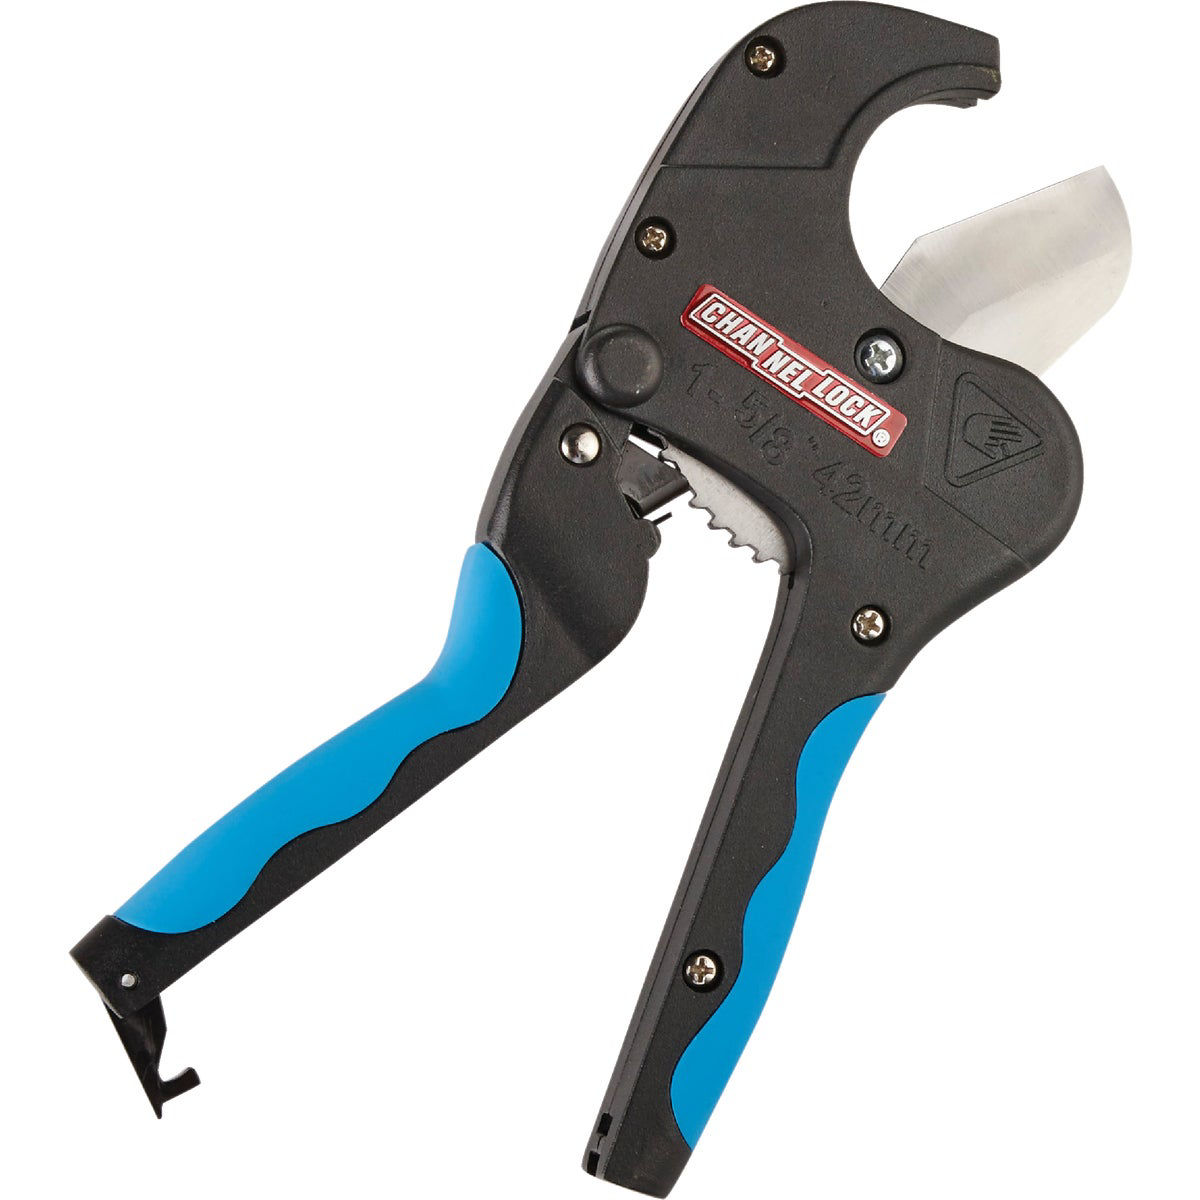 Chain Link Heavy-Duty Gate Clip Crimper - Fence Tool (Pressed